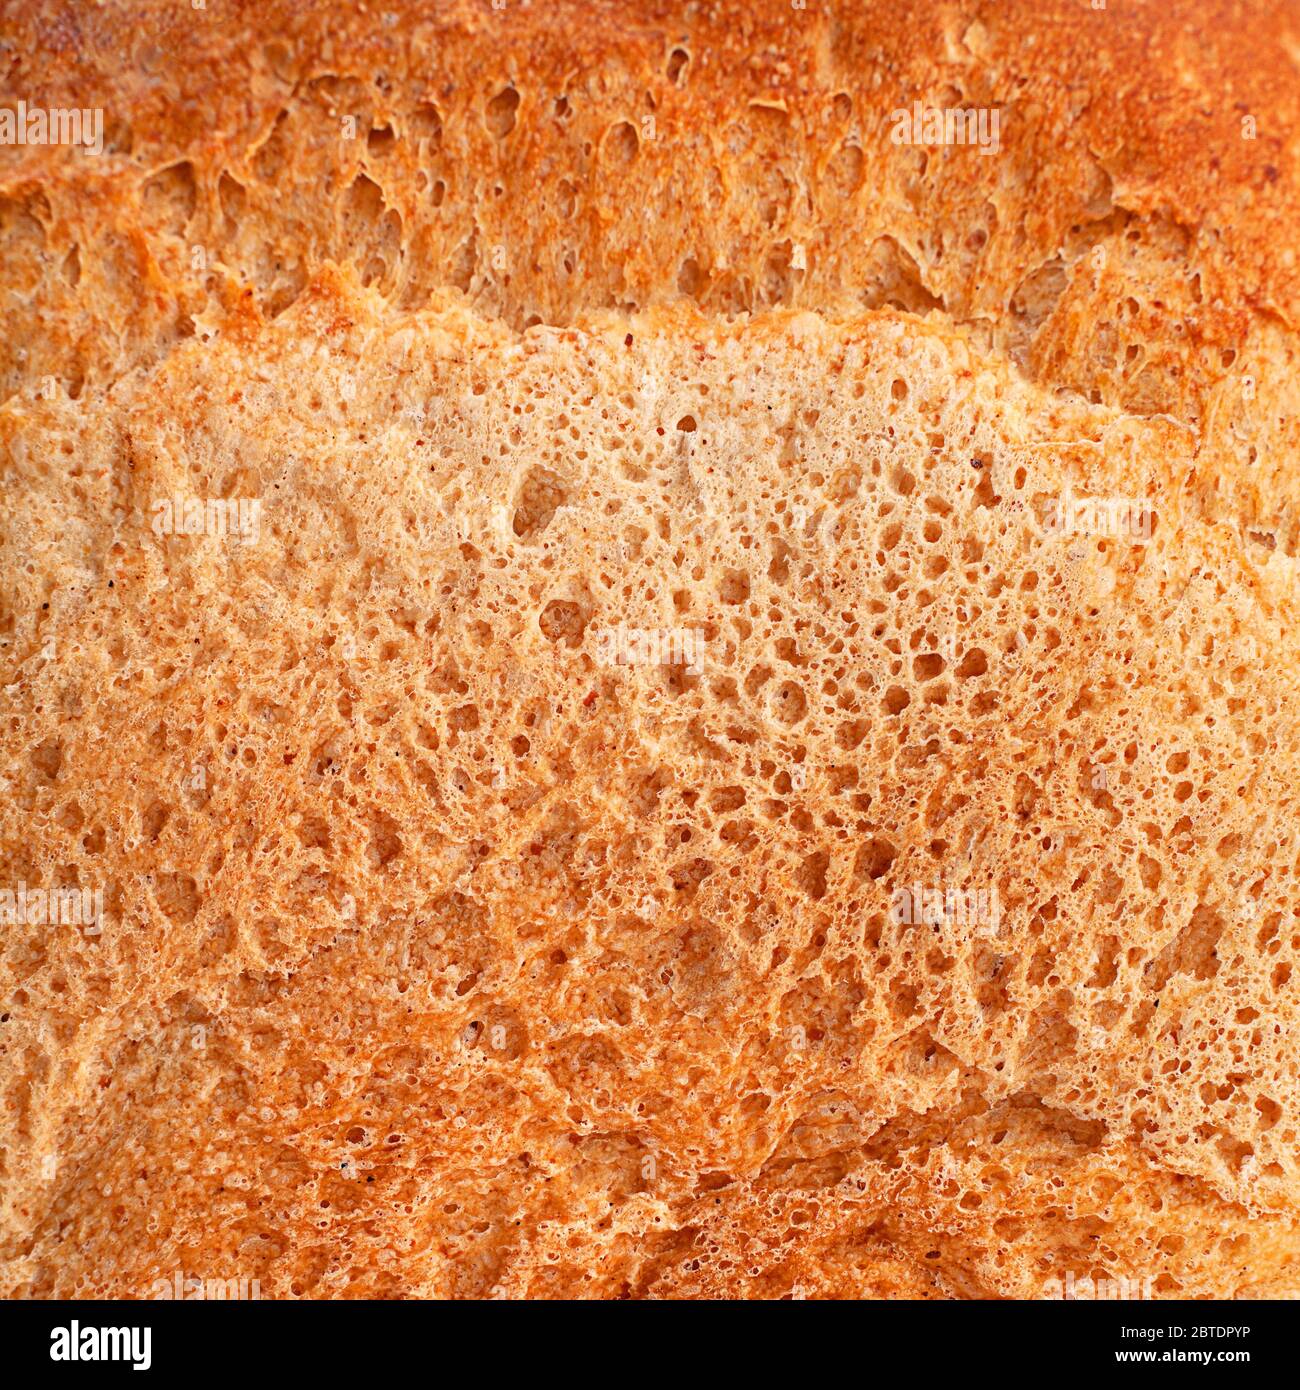 Square bread loaf closeup background Stock Photo